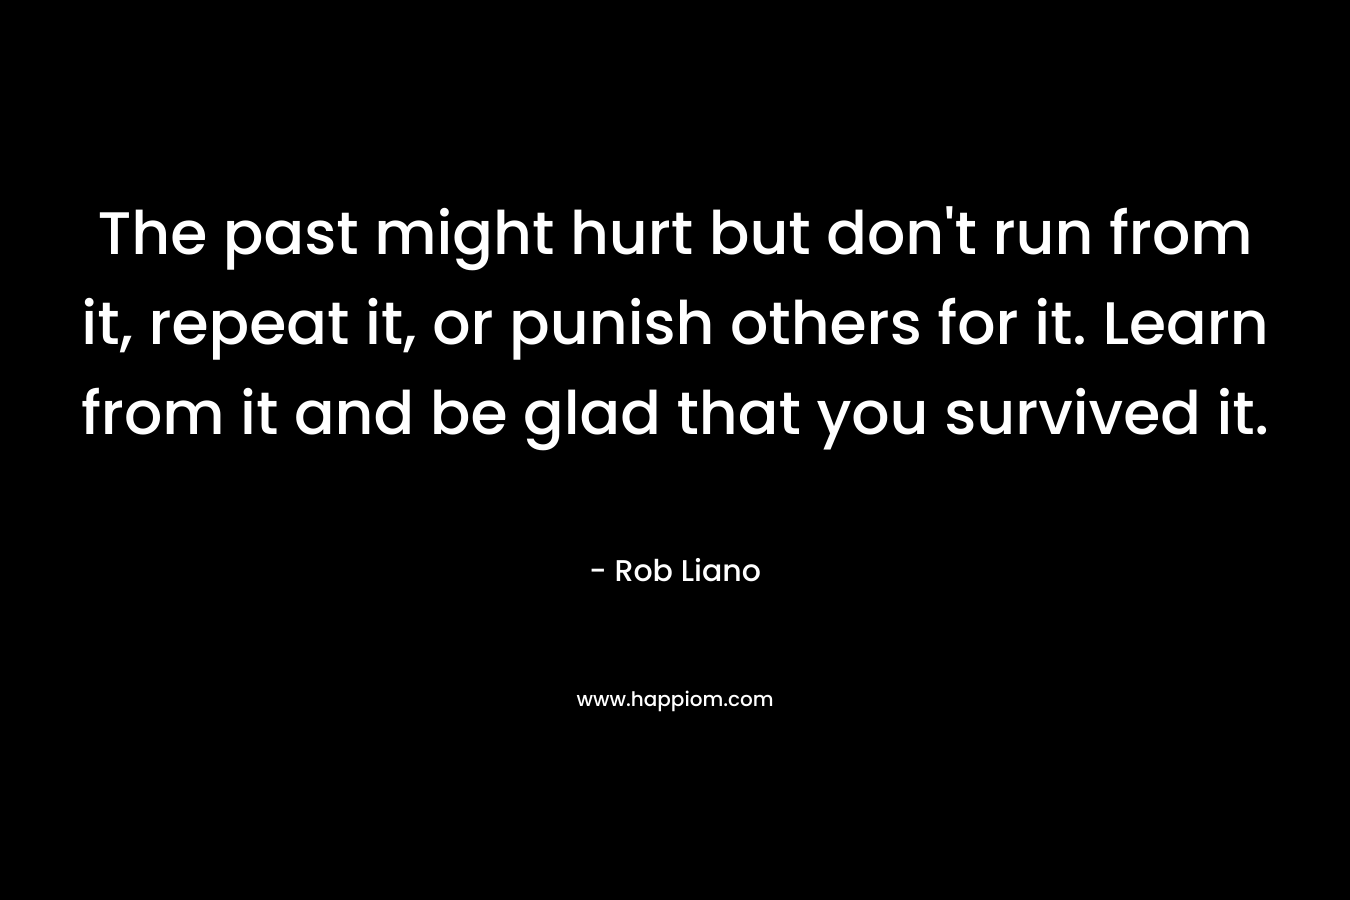 The past might hurt but don't run from it, repeat it, or punish others for it. Learn from it and be glad that you survived it.